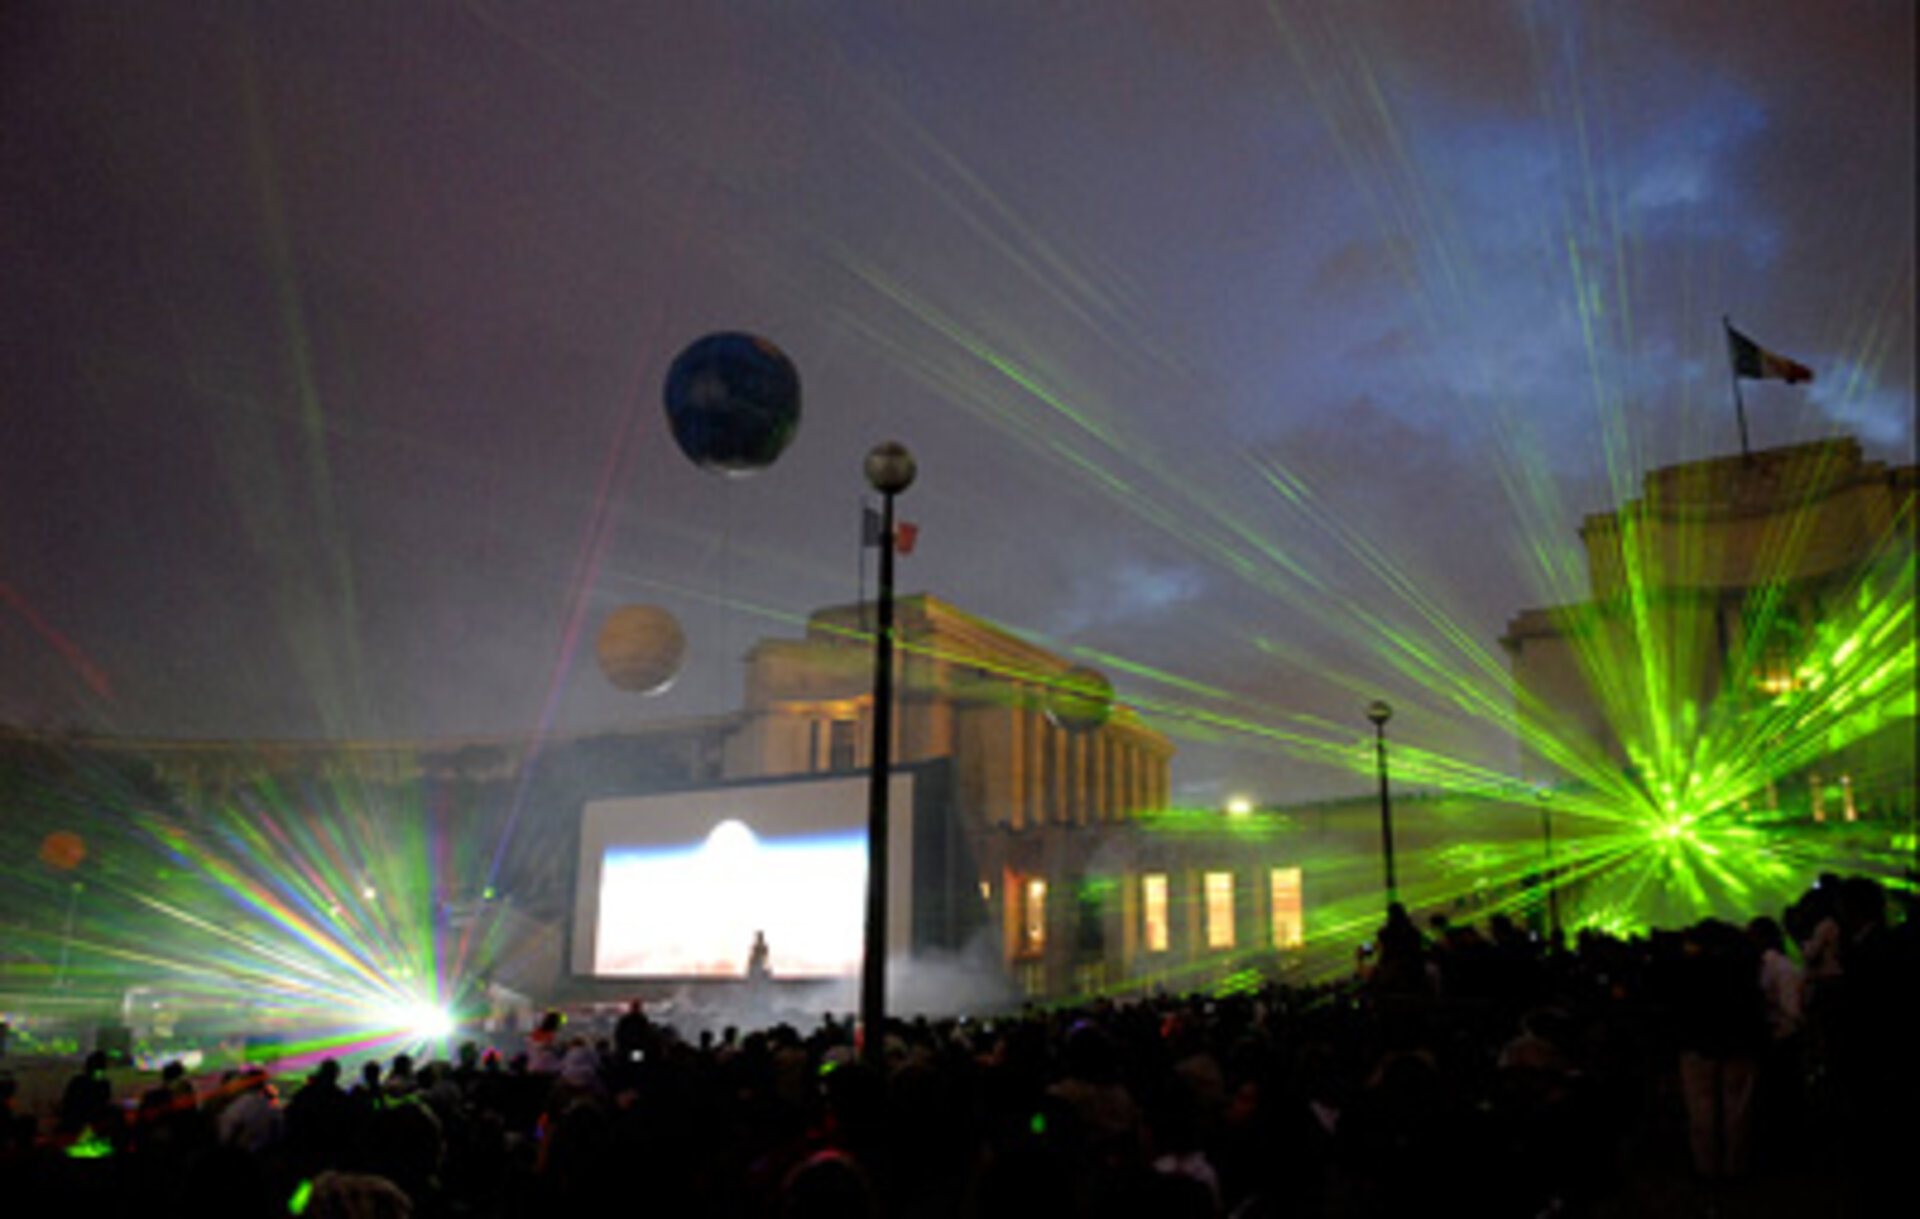 The laser space show at the Trocadero